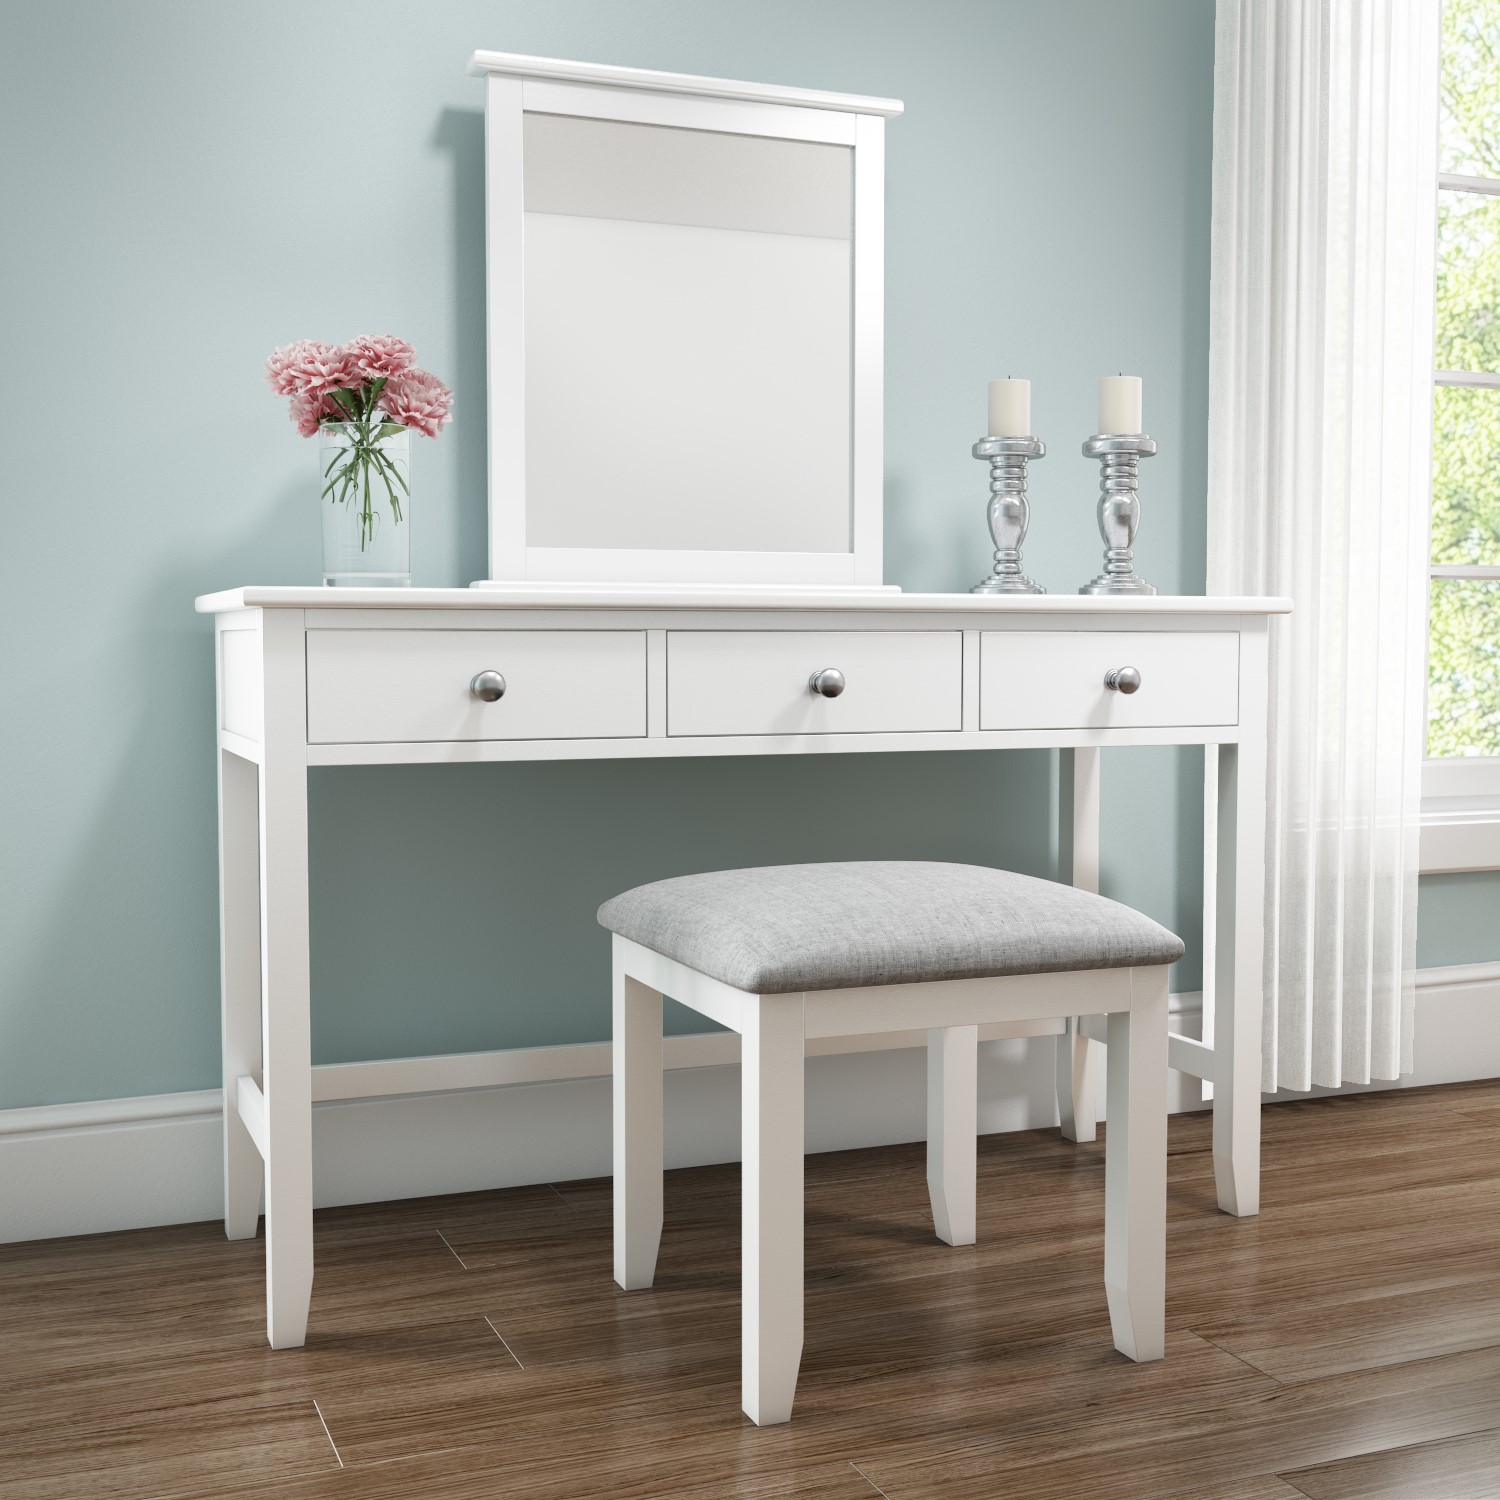 The Furniture Outlet Gloucester White Painted Oak Dressing Table Mirror